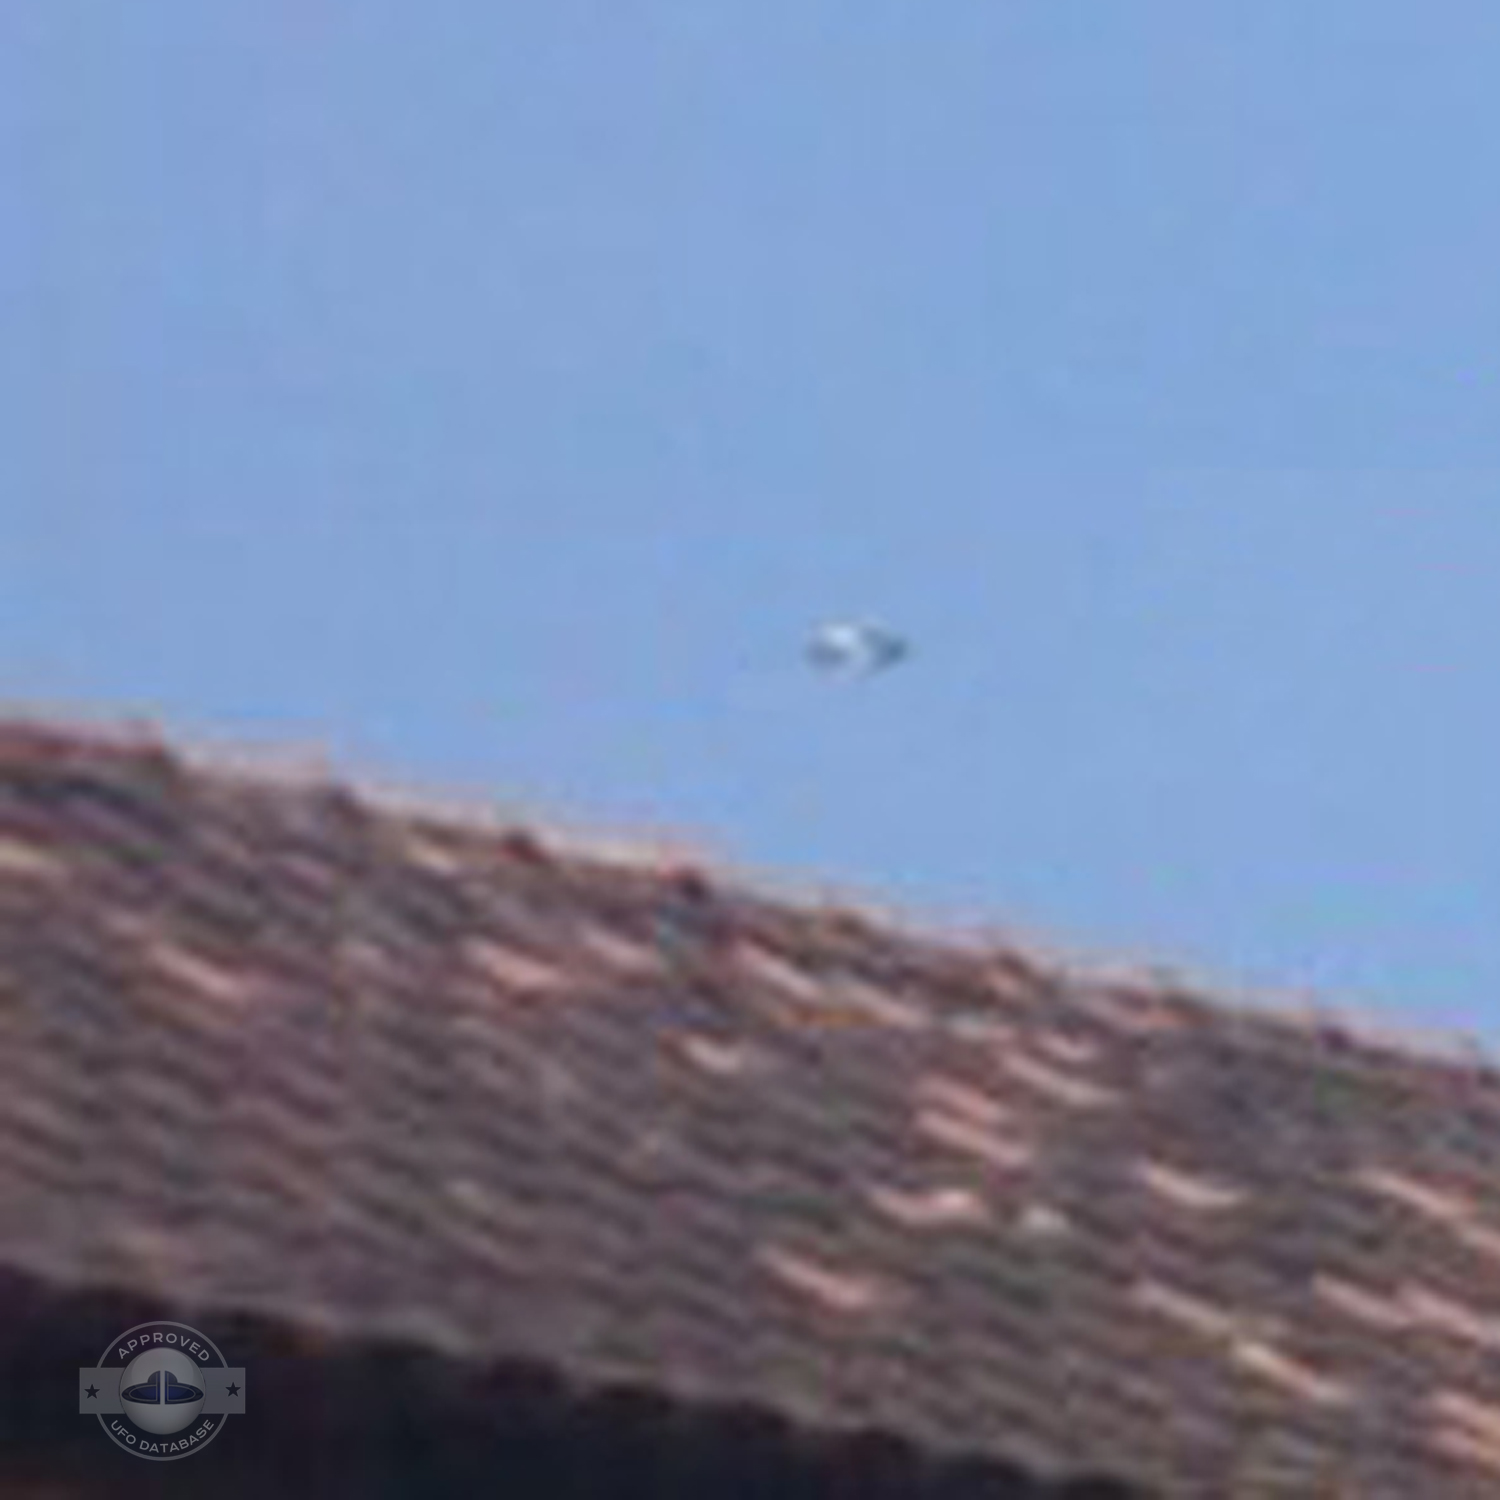 Fast Saucer UFO over houses of Ibirite, Minas Gerais, Brazil | 2008 UFO Picture #214-4